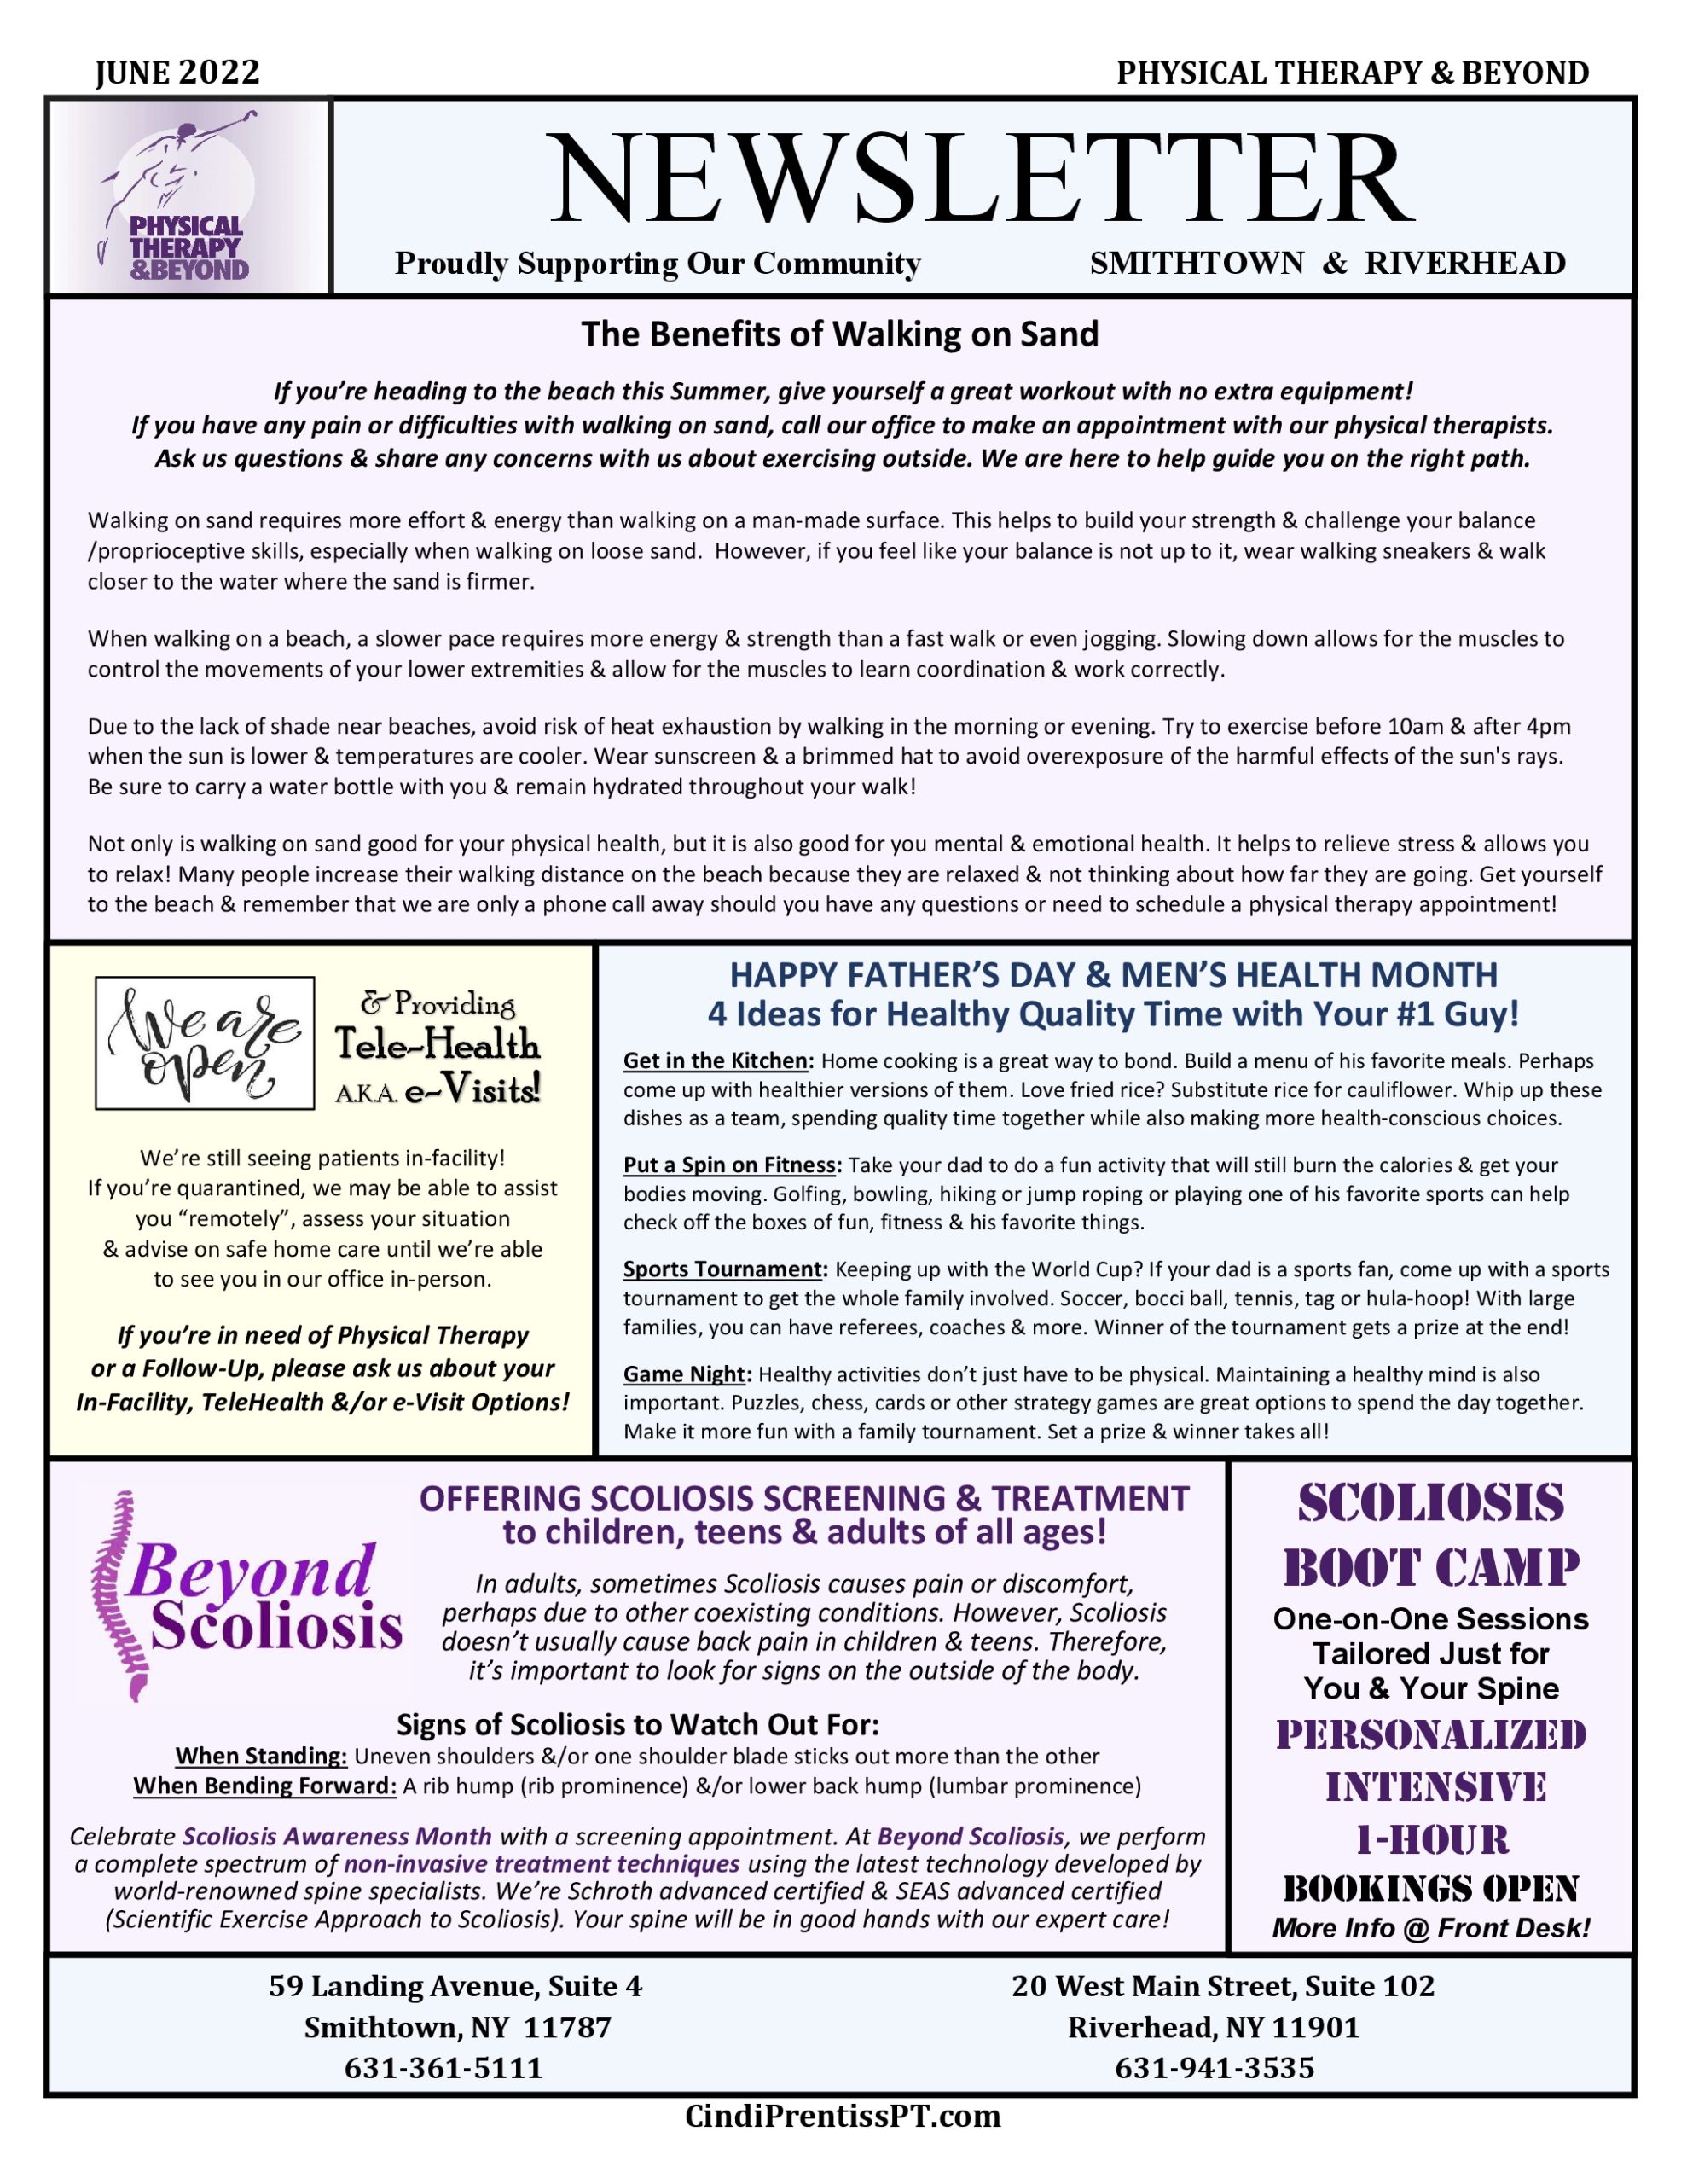 Physical Therapy & Beyond Newsletter June 2022